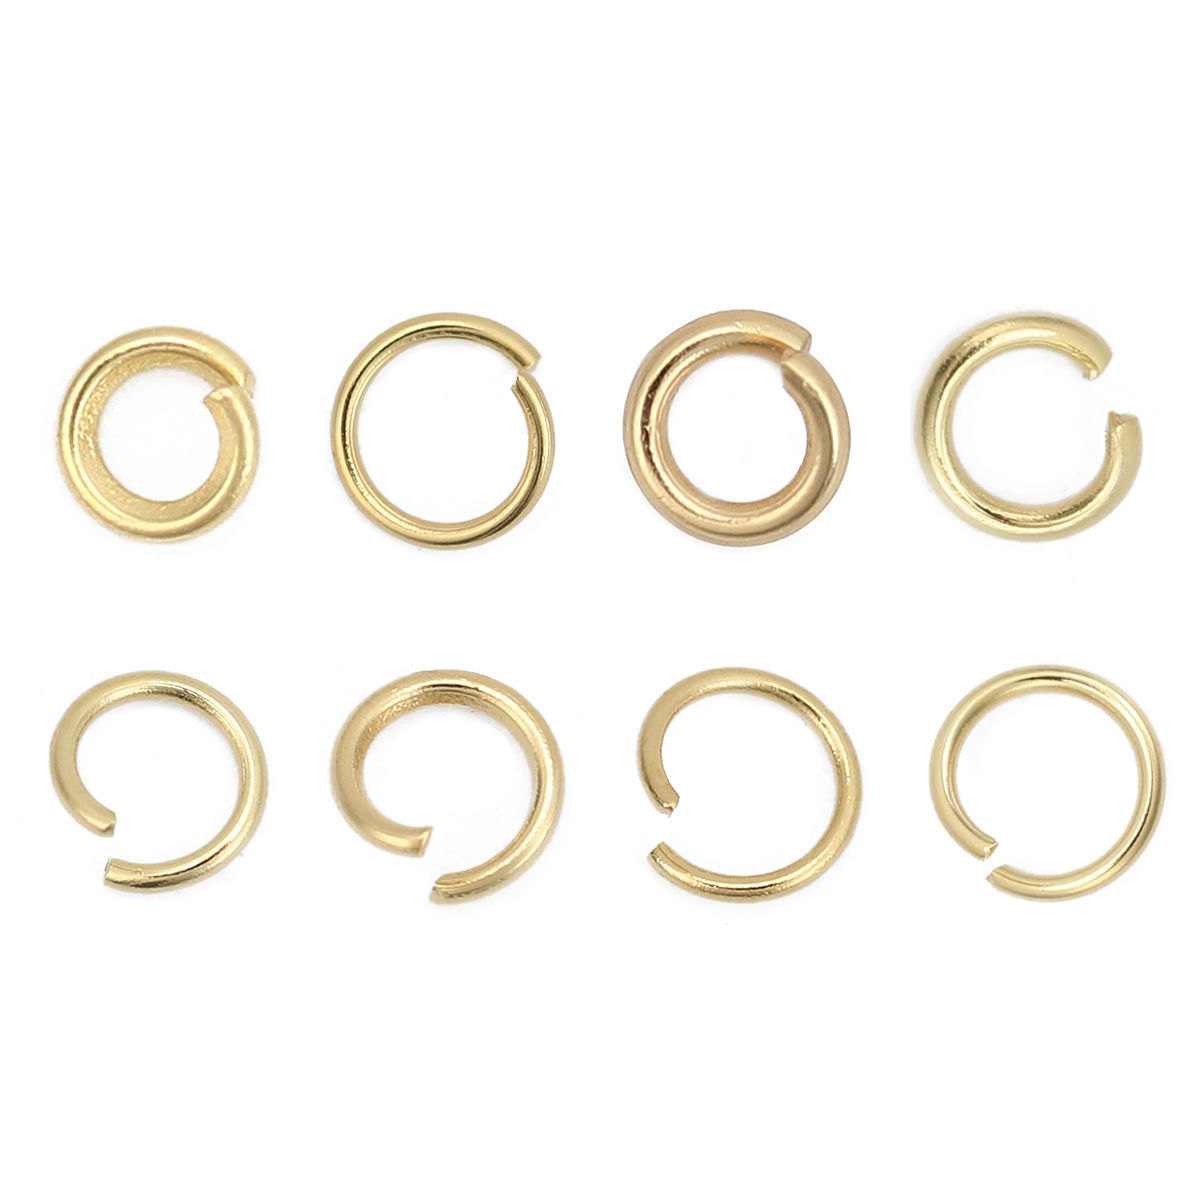 Picture of (20 gauge) 304 Stainless Steel Open Jump Rings Findings Gold Plated 6mm Dia., 500 PCs